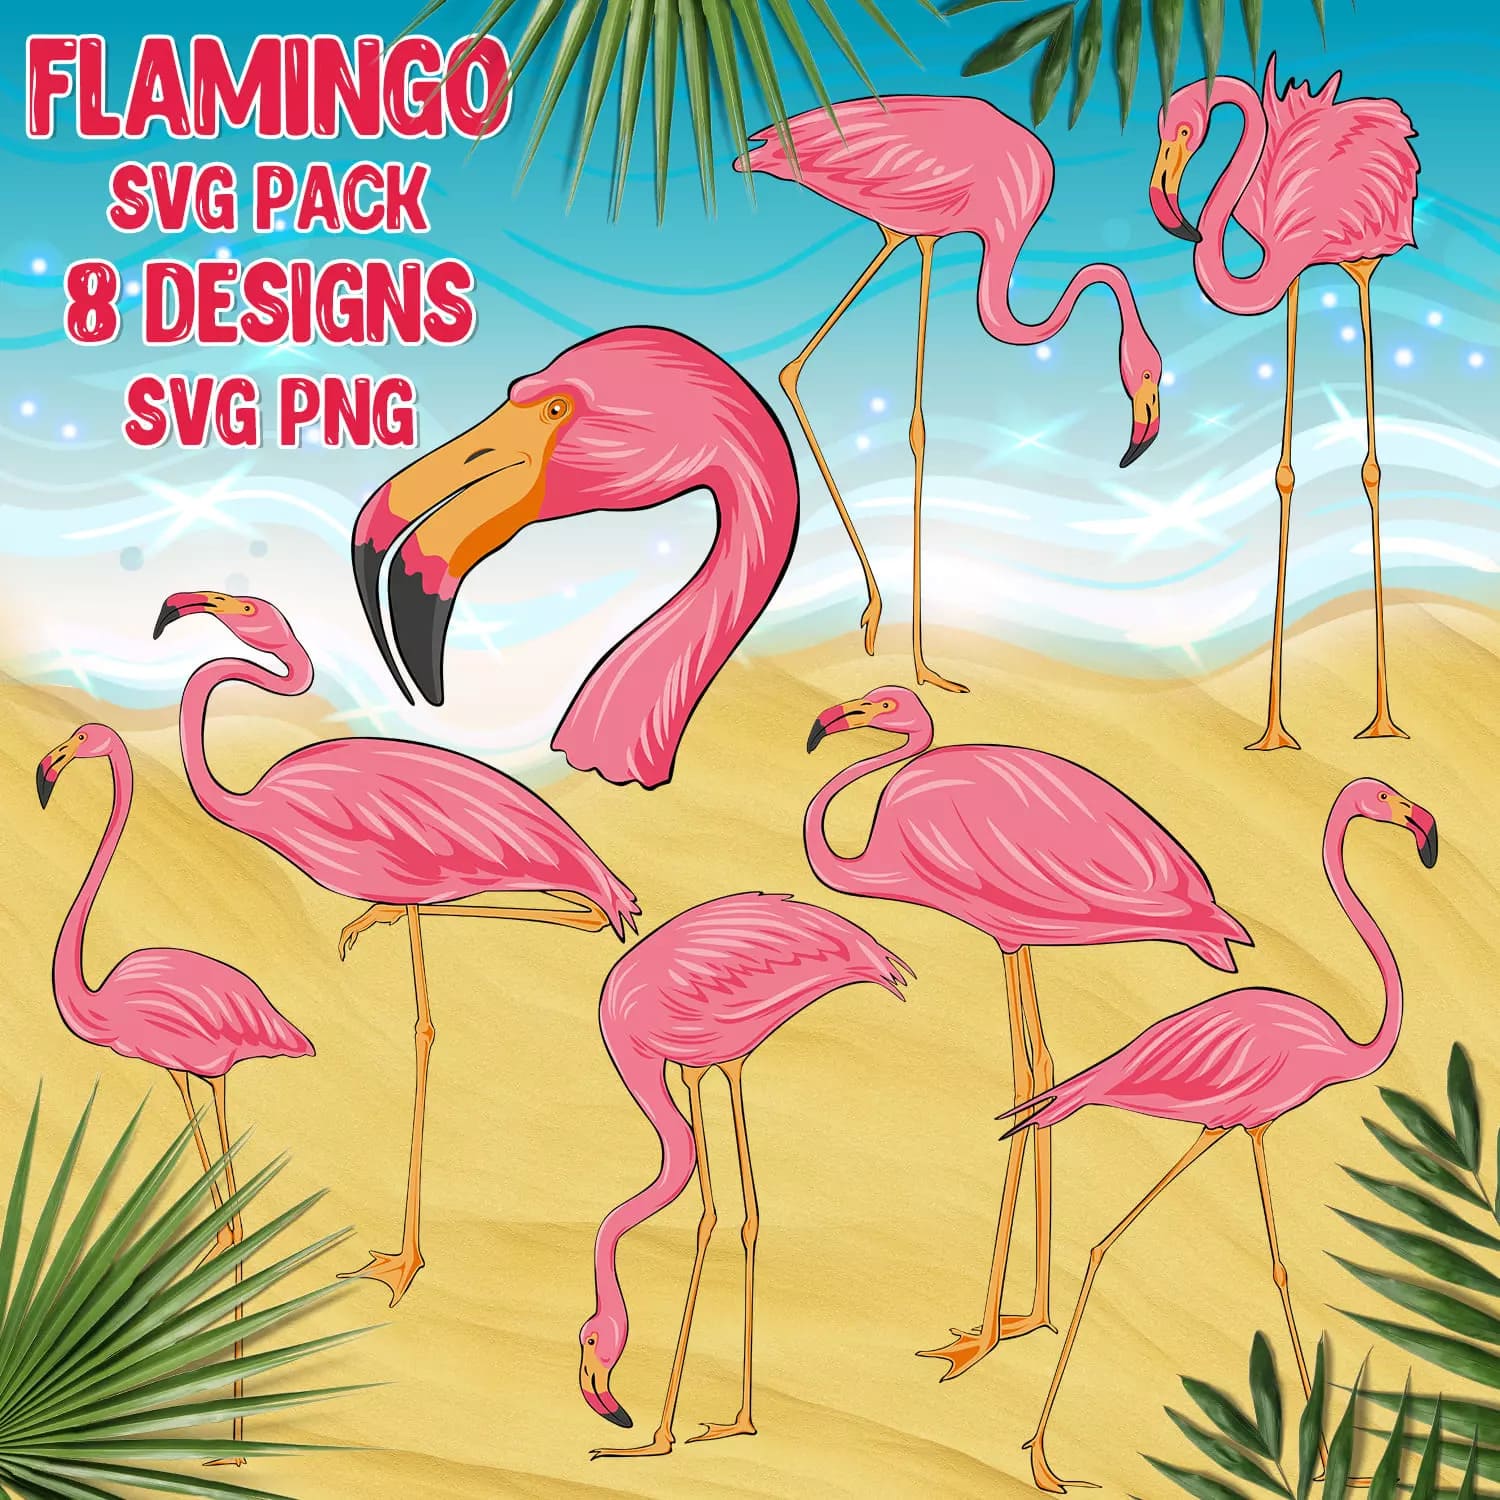 Group of flamingos standing on top of a sandy beach.